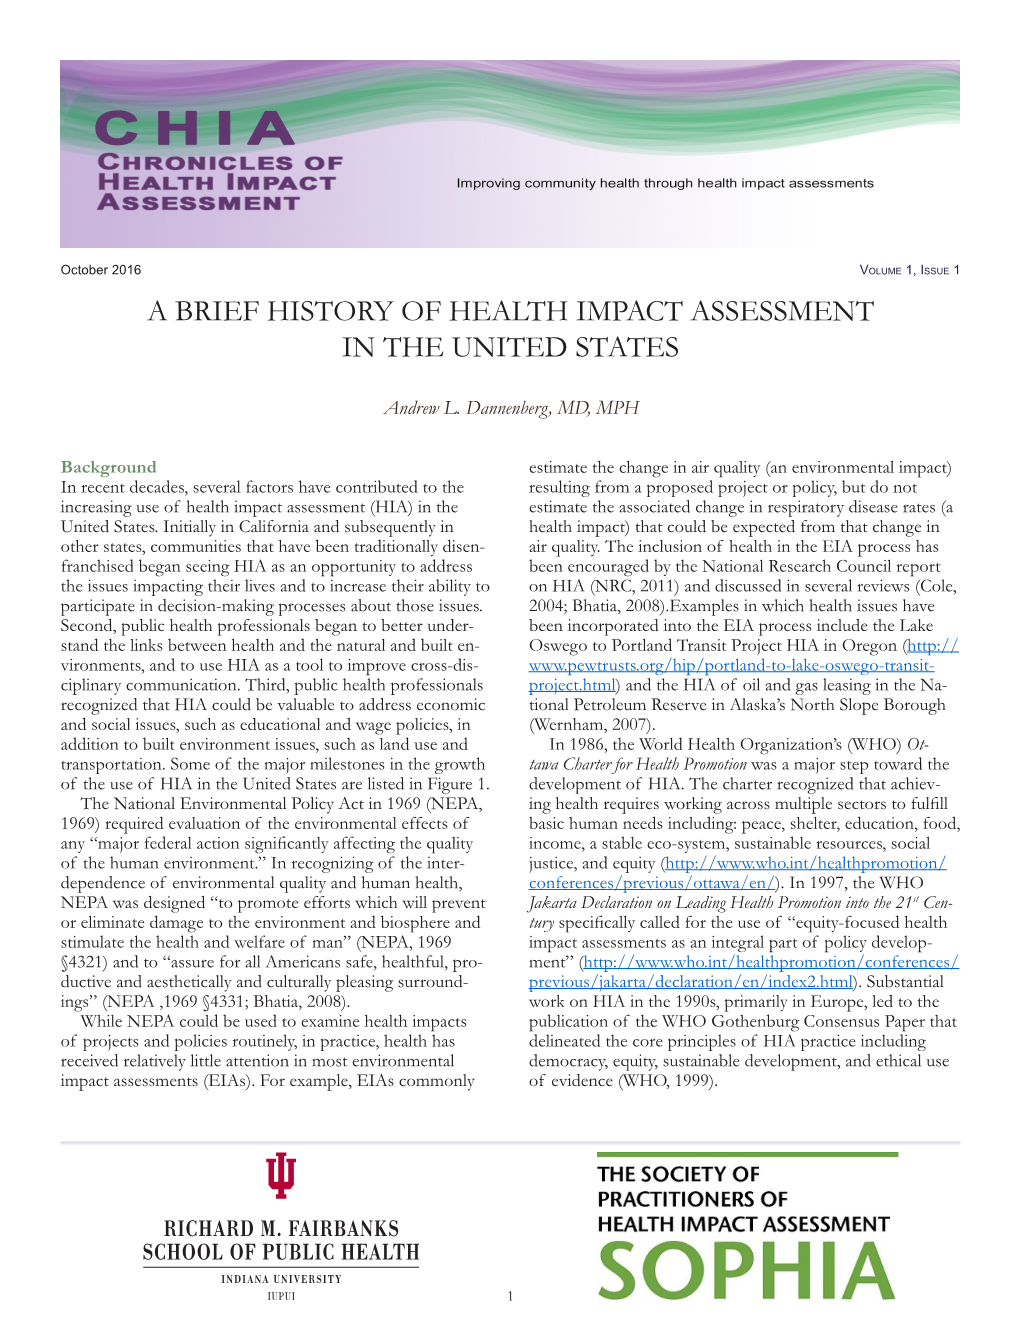 A Brief History of Health Impact Assessment in the United States